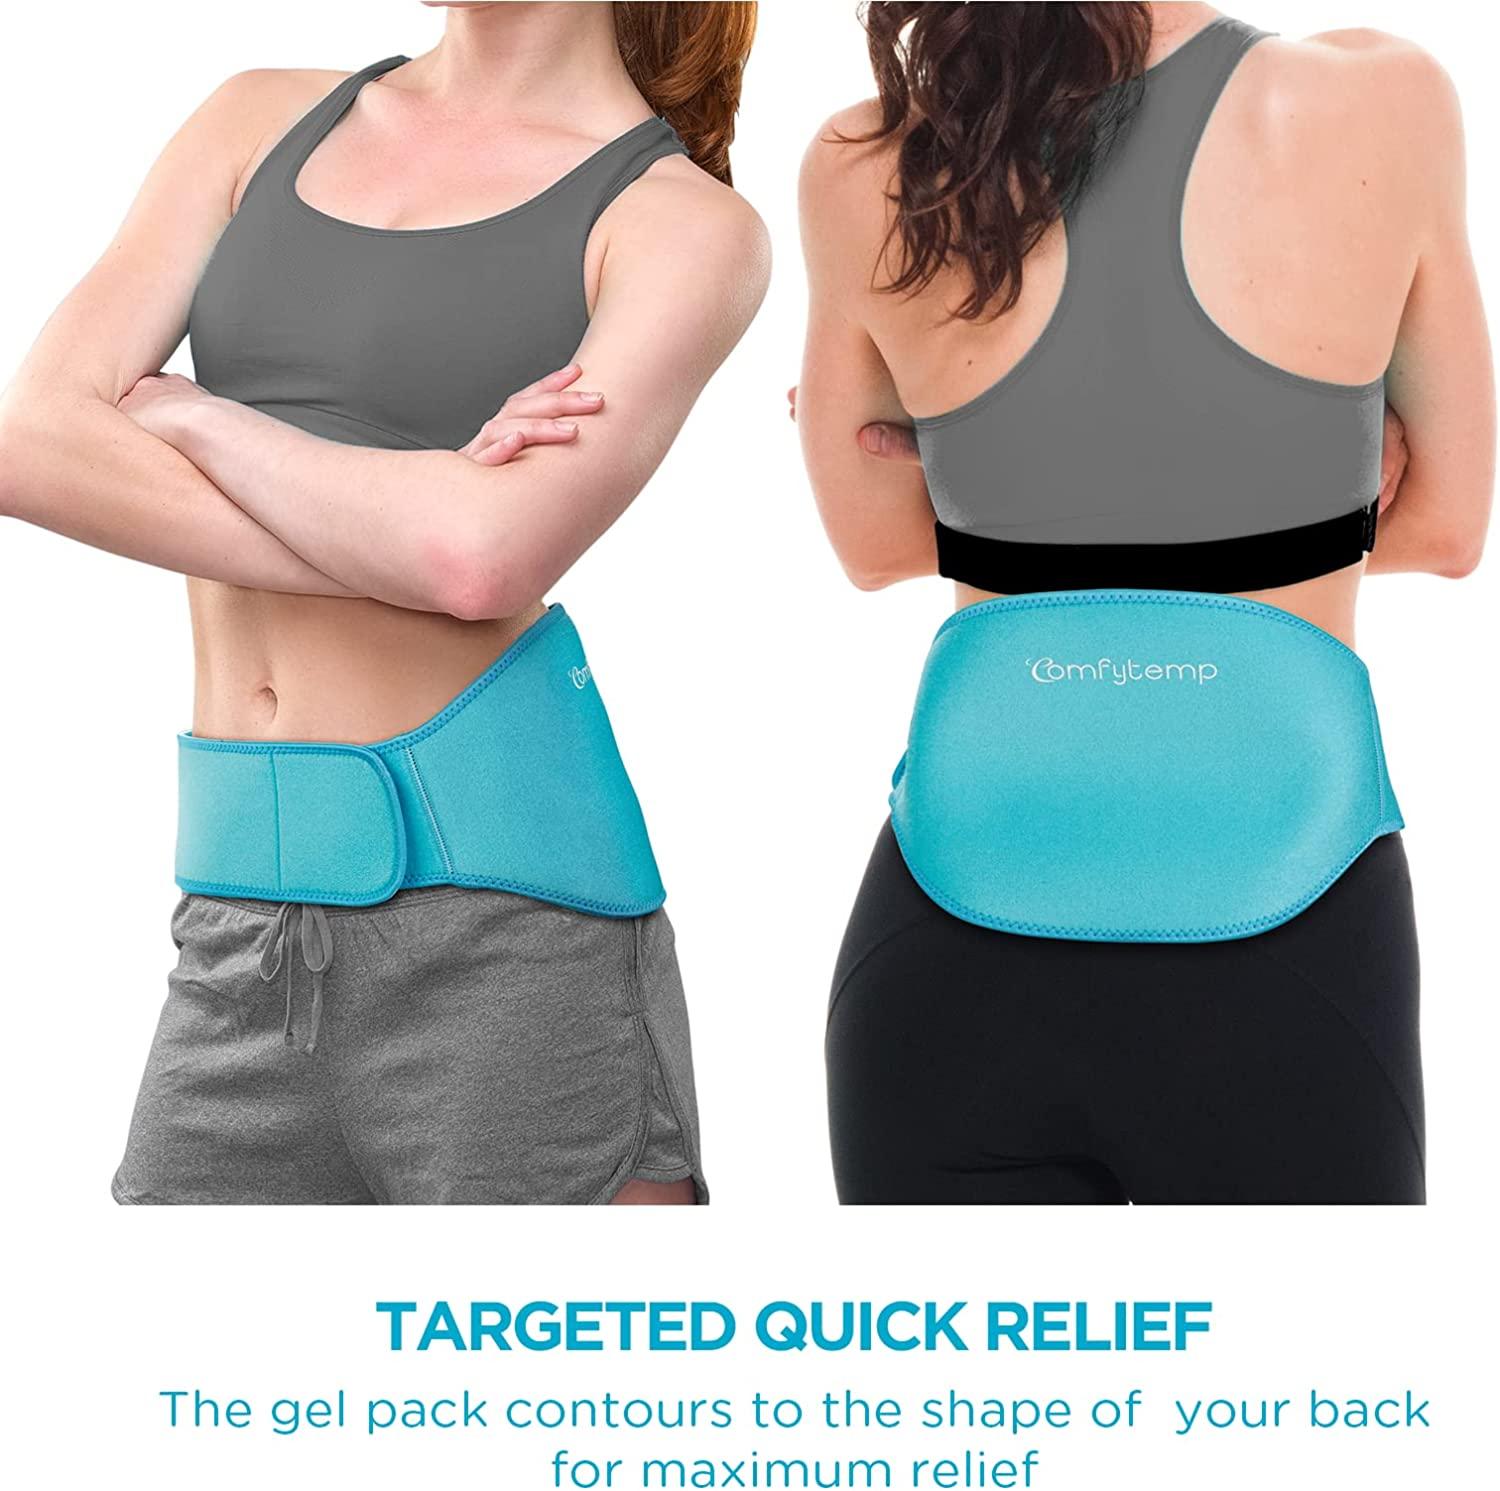 Ice Packs for Back Pain Relief